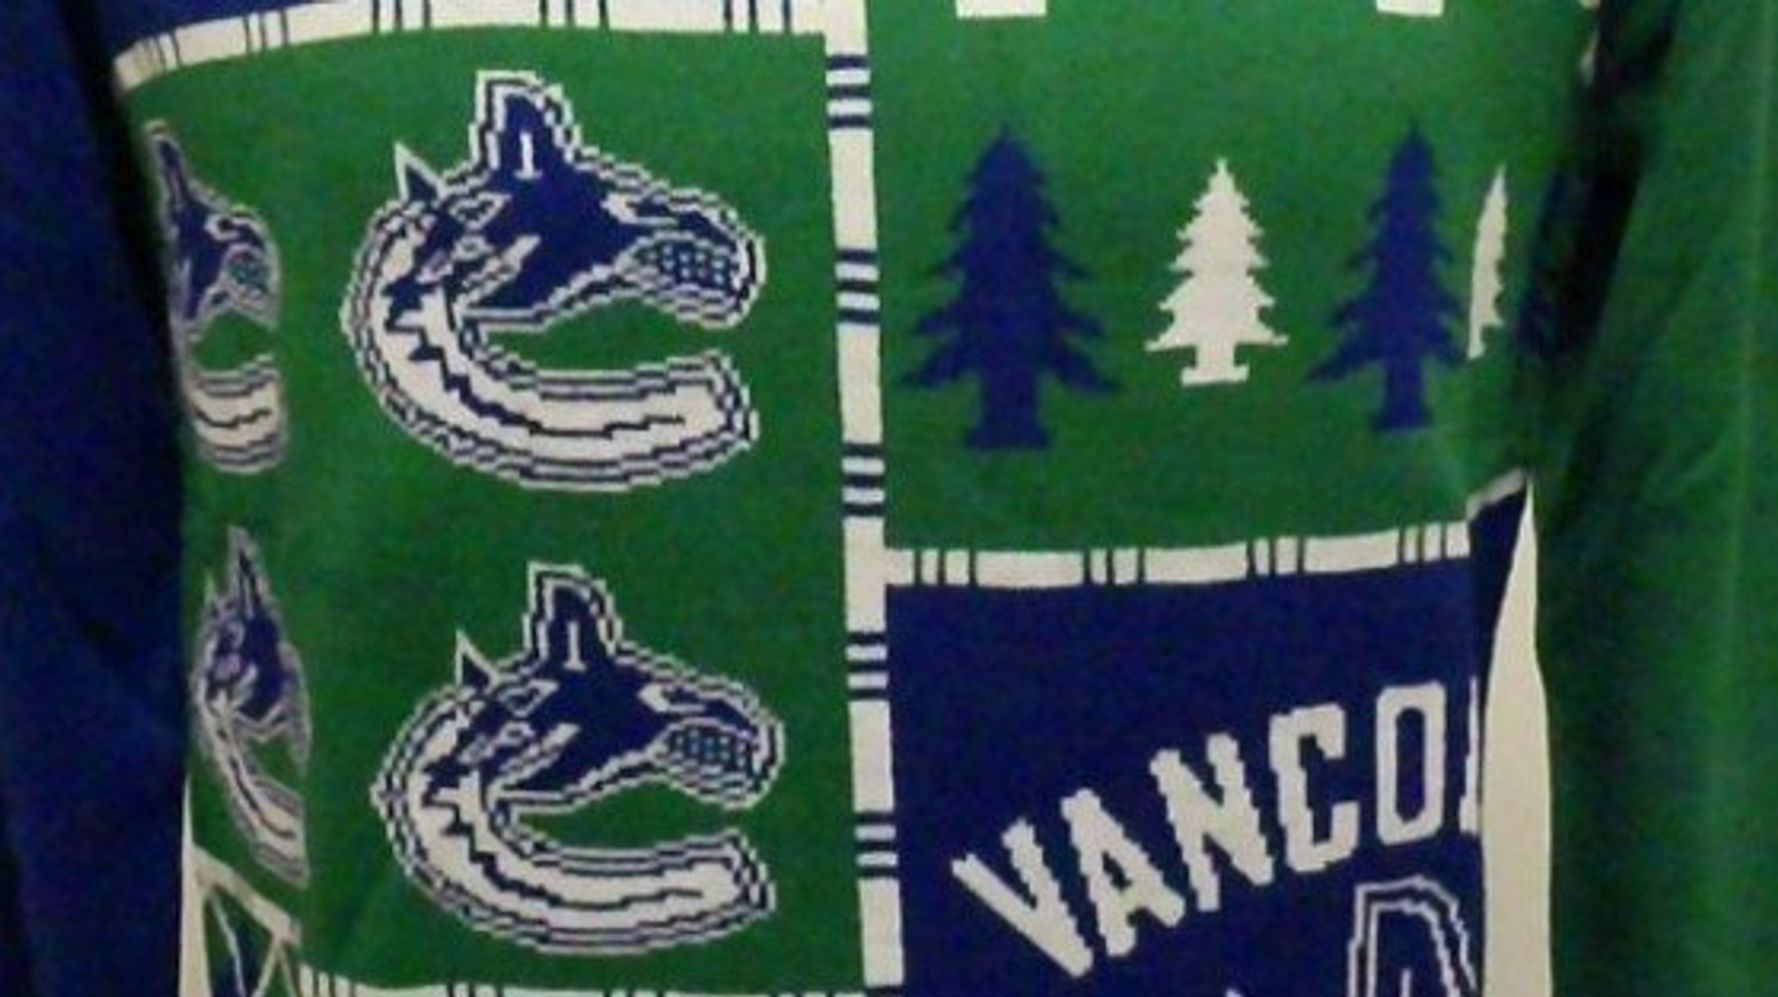 NHL Vancouver Canucks Christmas Ugly Sweater Print Funny Grinch